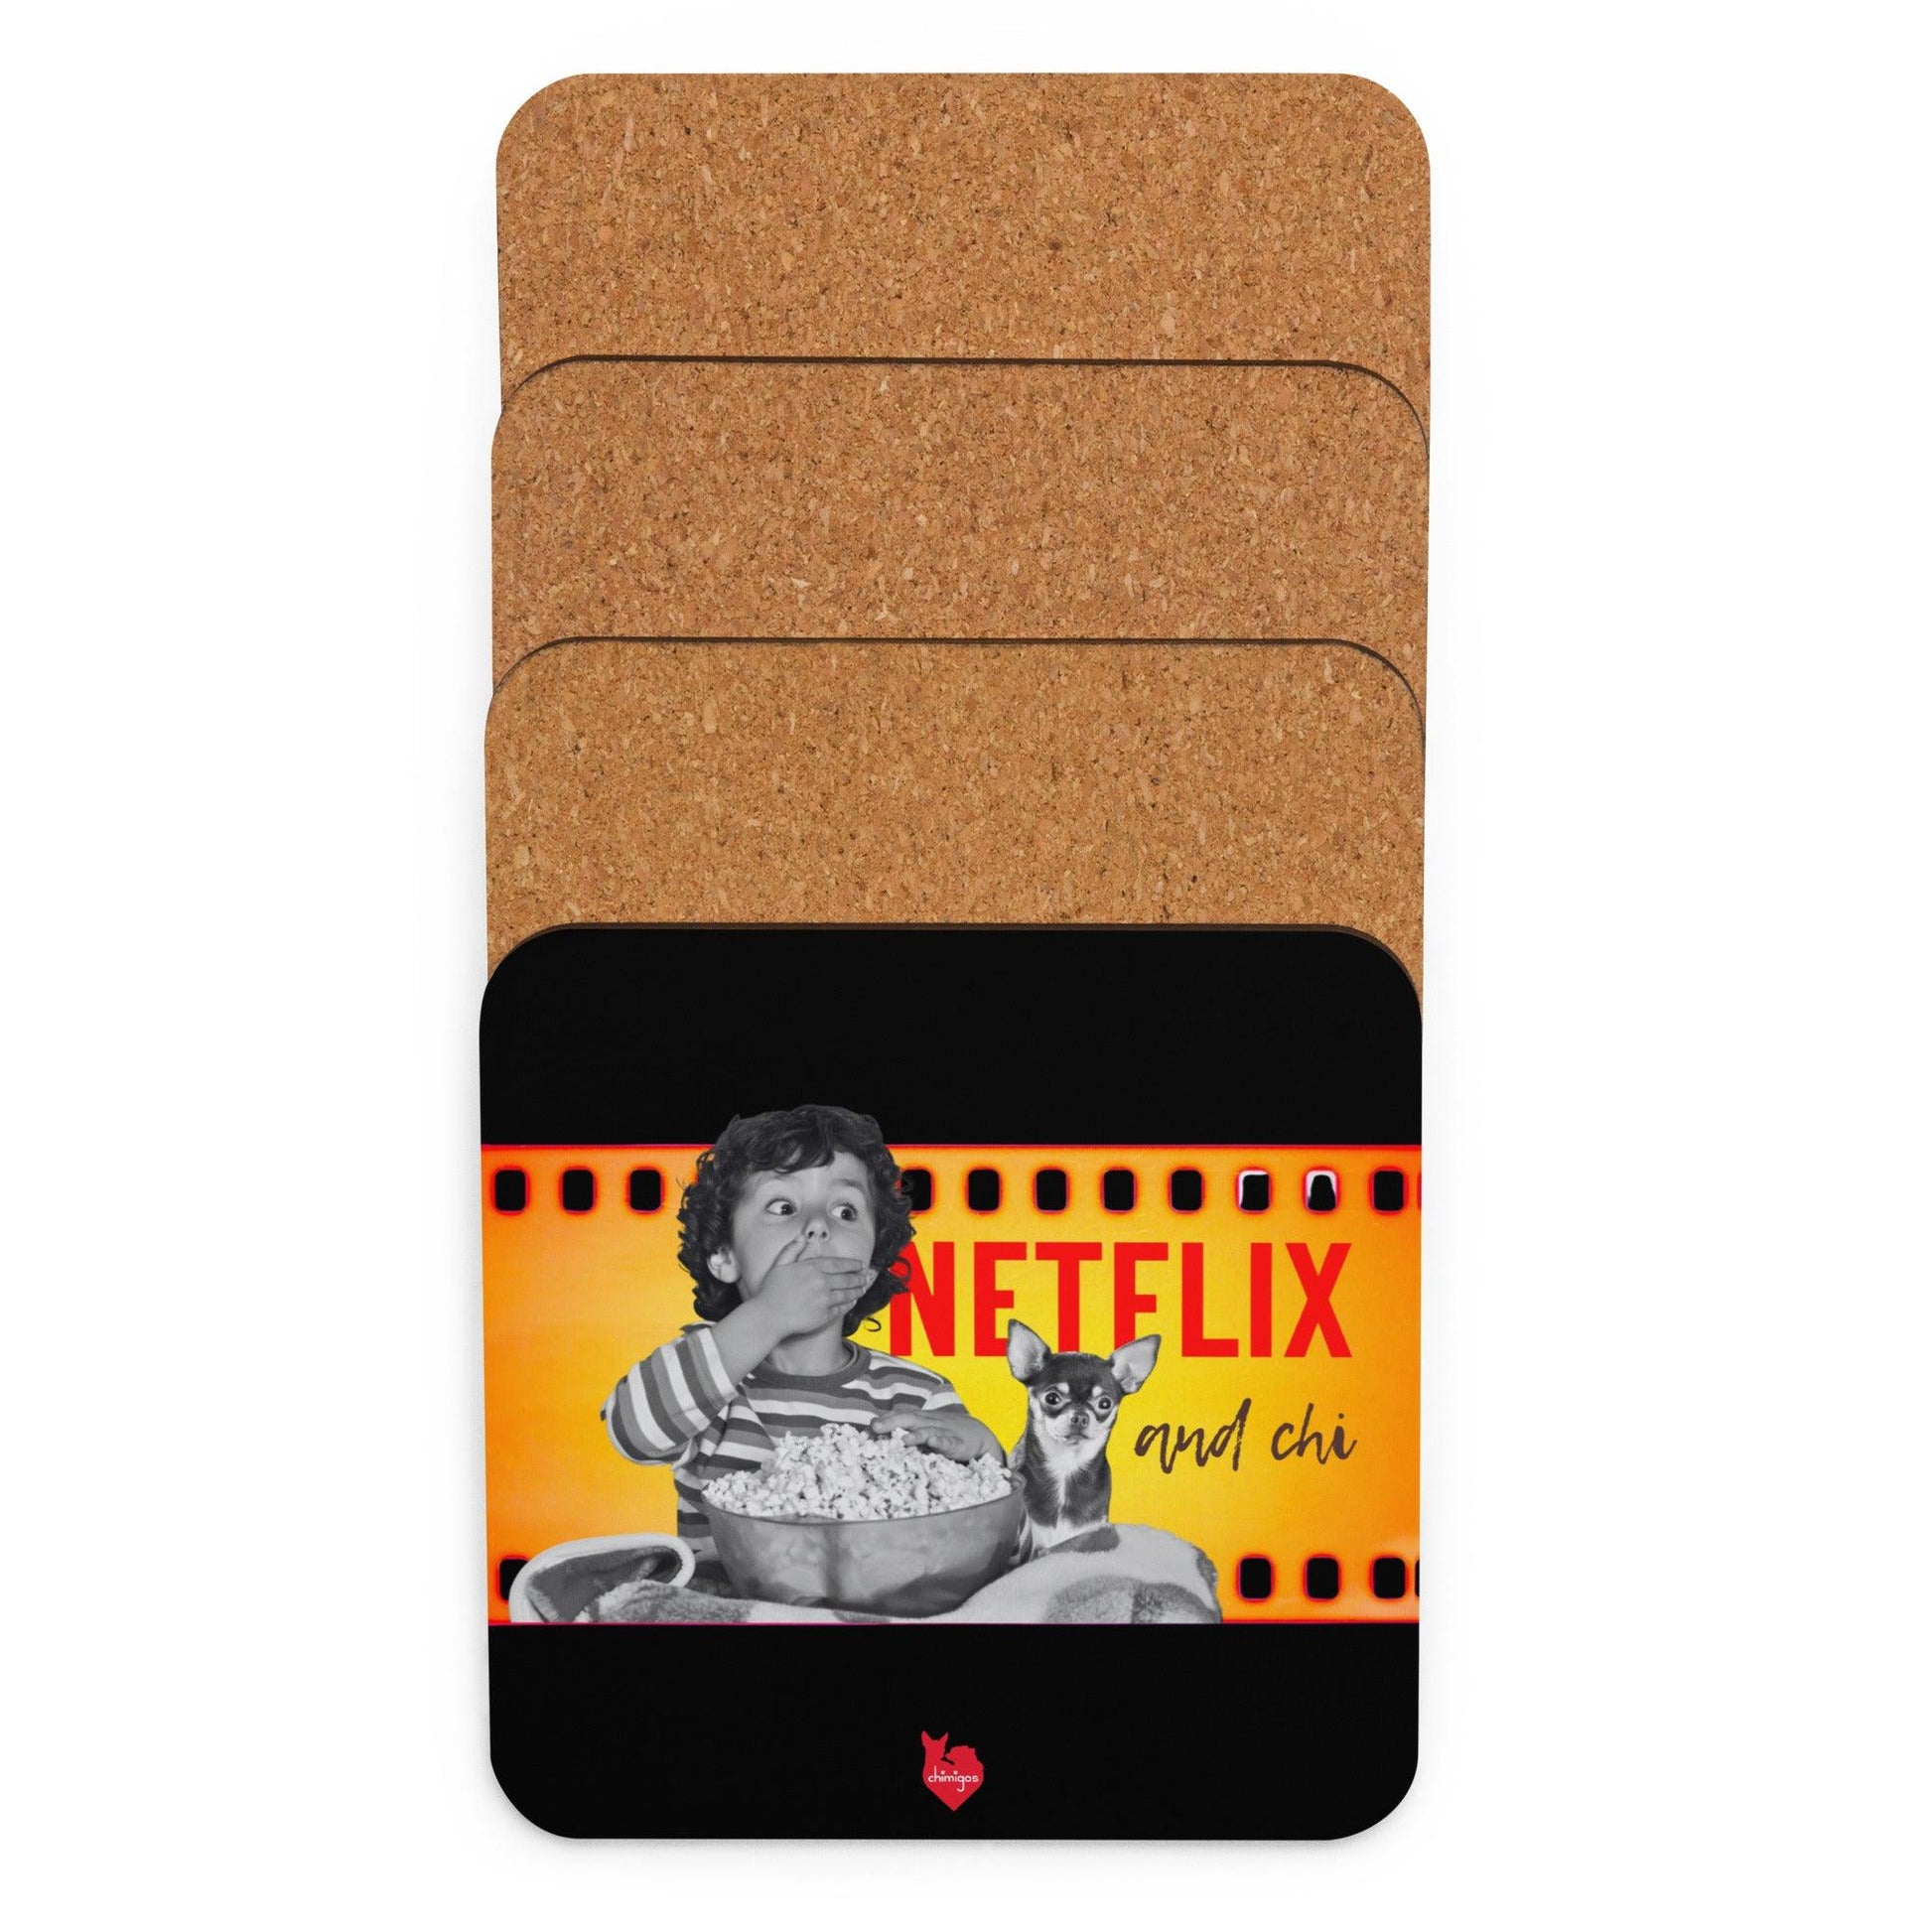 What's better than a Saturday night at home doing Netflix and Chill? Netflix and CHI! If your best Netflix and Chill sofa buddy is a little chihuahua, then this adorable Netflix and Chi coaster is meant for you. Or a brilliant gift for friends and family who are chihuahua parents. Why not check out our Netflix and Chi cups and glasses, and many more products to complete your chihuahua-themed home cinema ambience? Designed by Renate Kriegler for Chimigos.